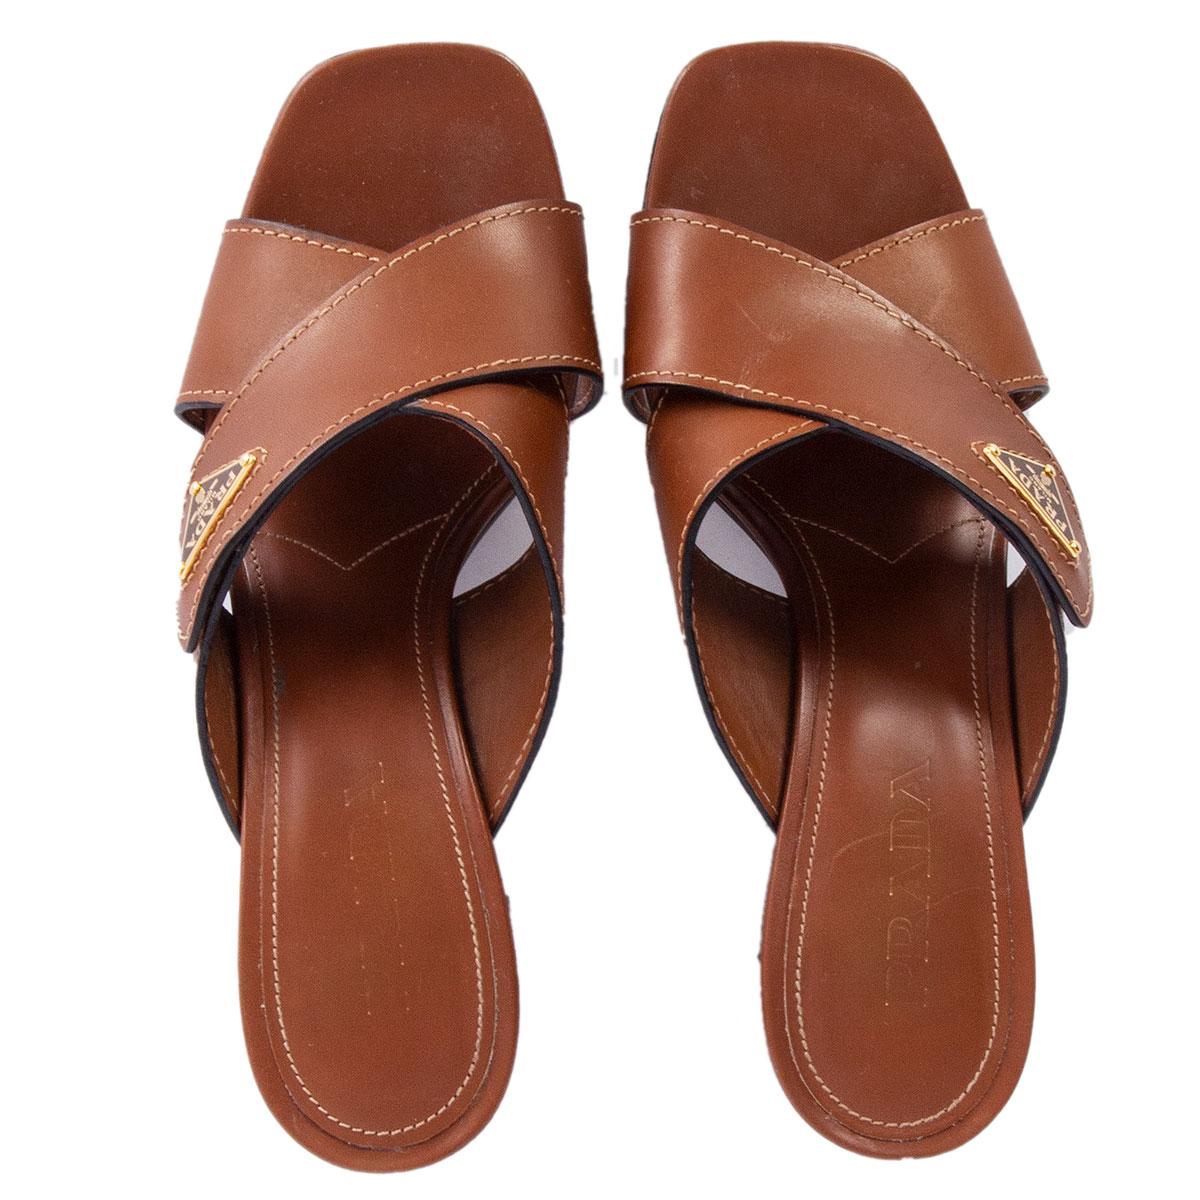 brown leather criss cross sandals